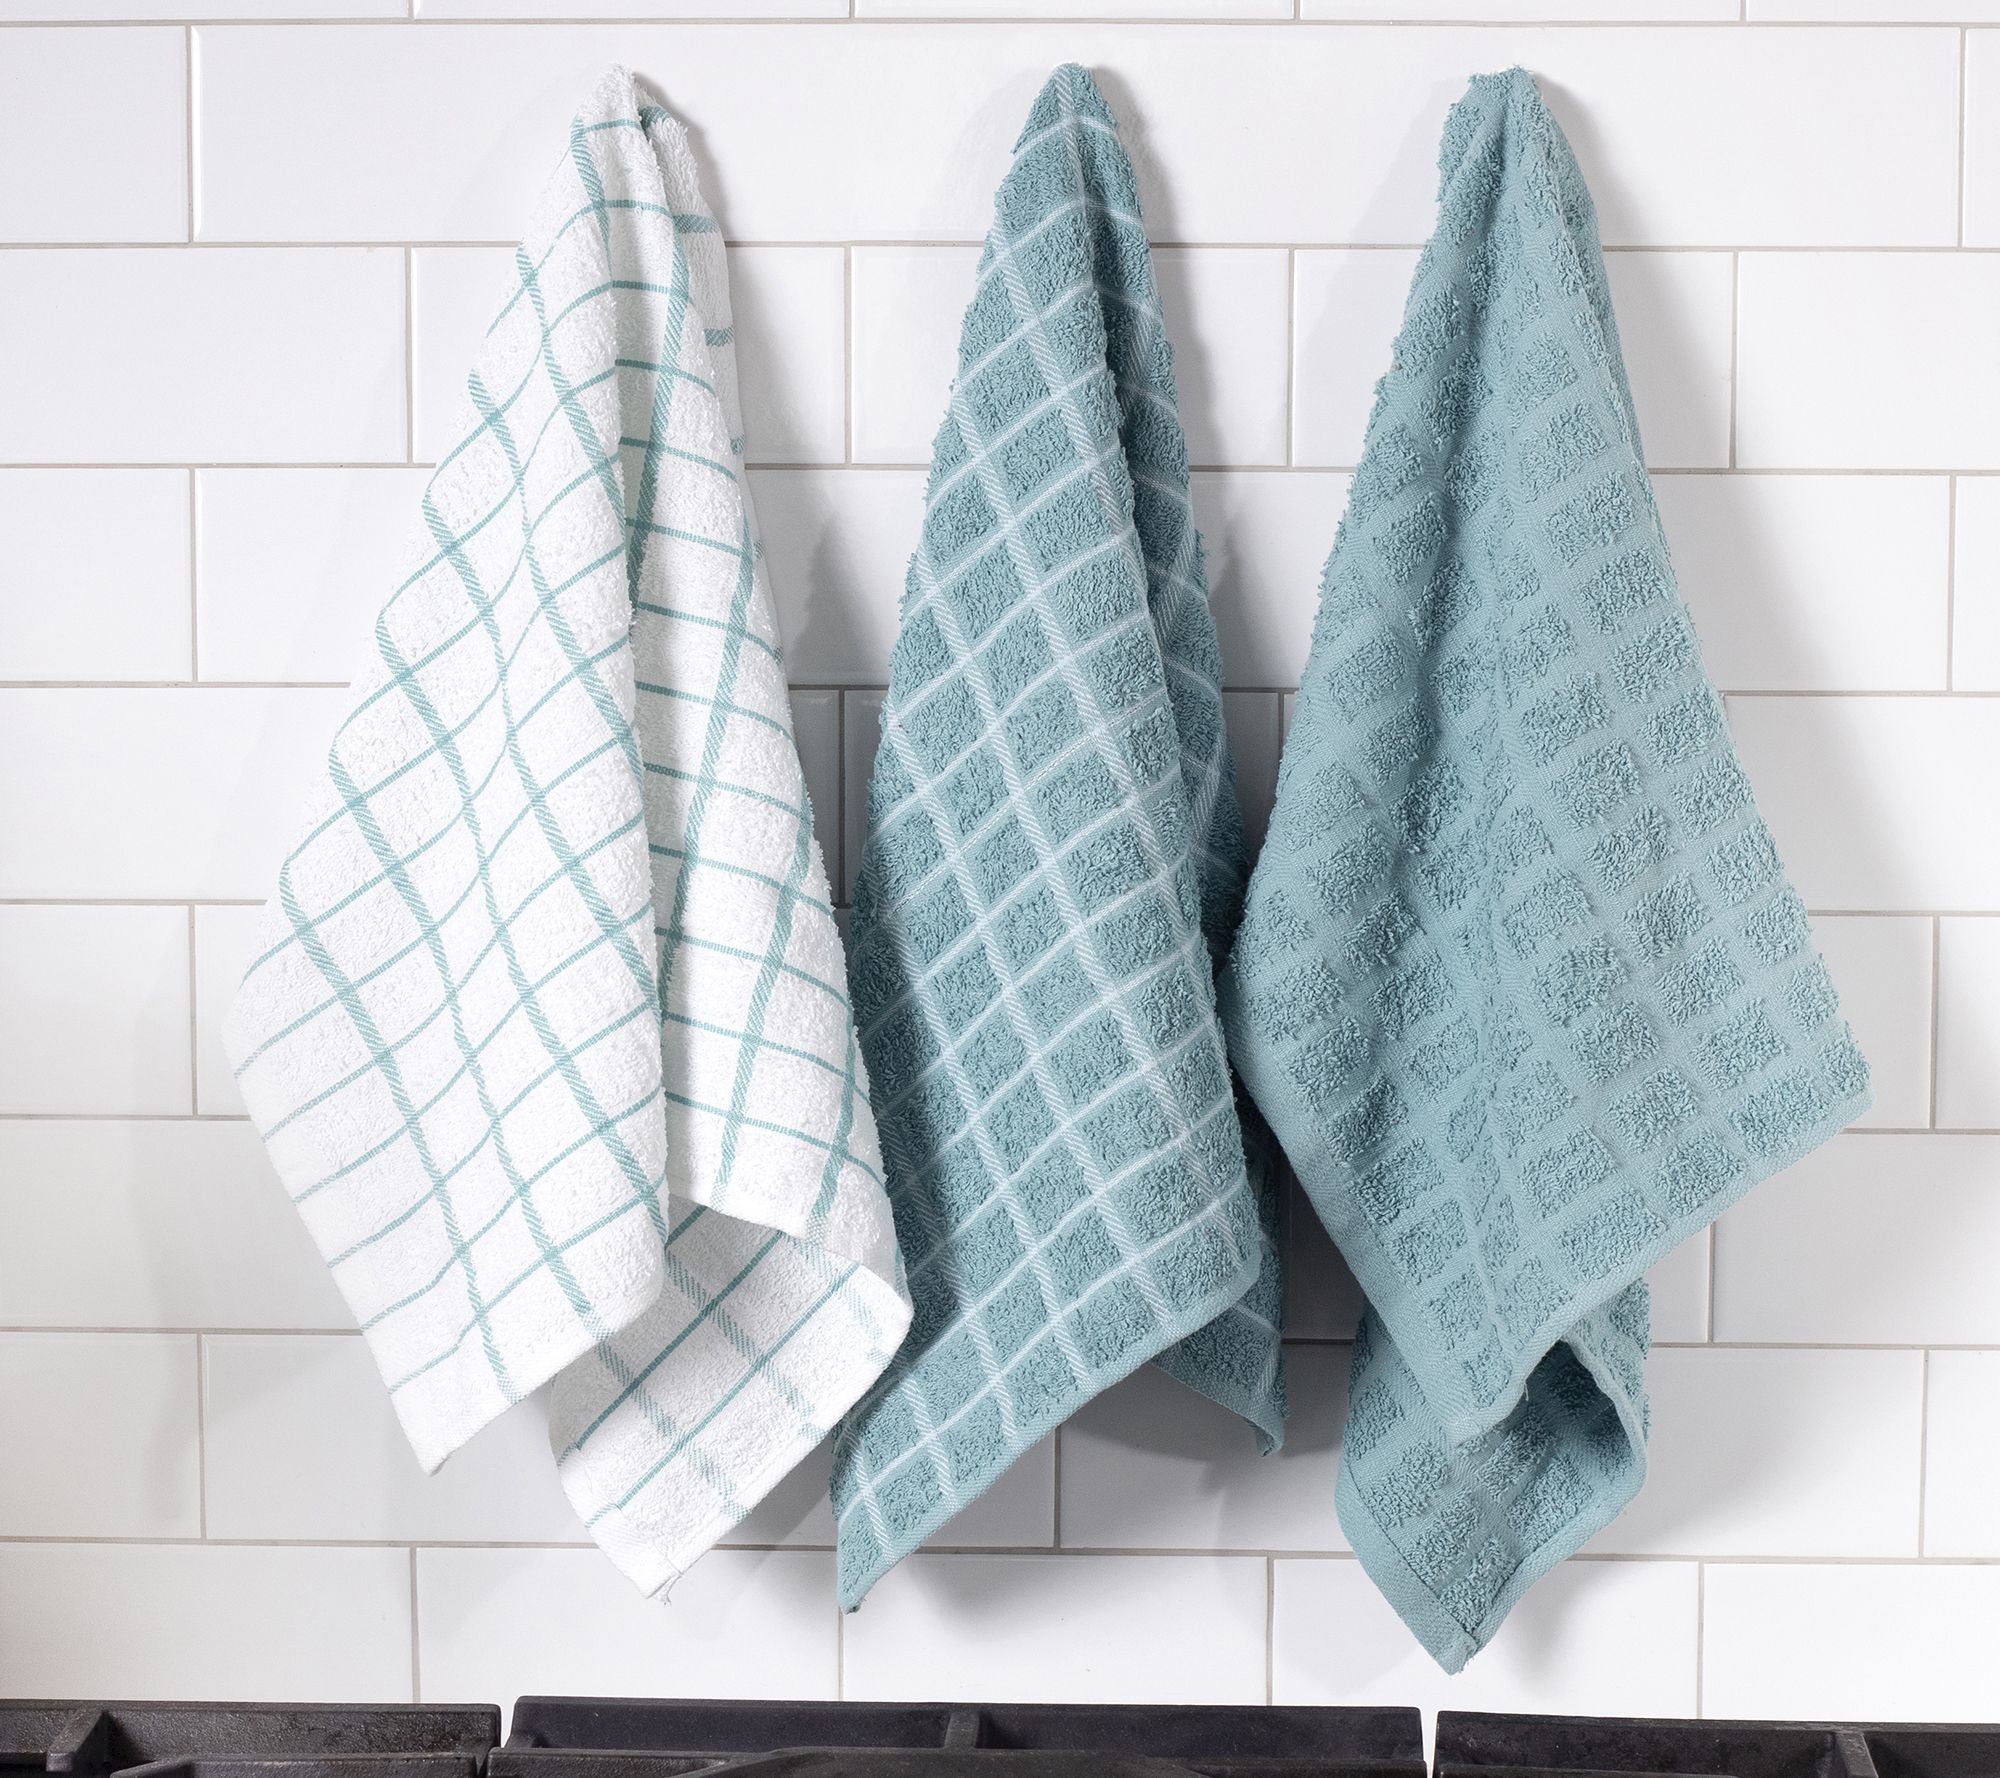 3-PK New CUISINART Cotton Kitchen Towels Gingham Plaid Blue White Assorted